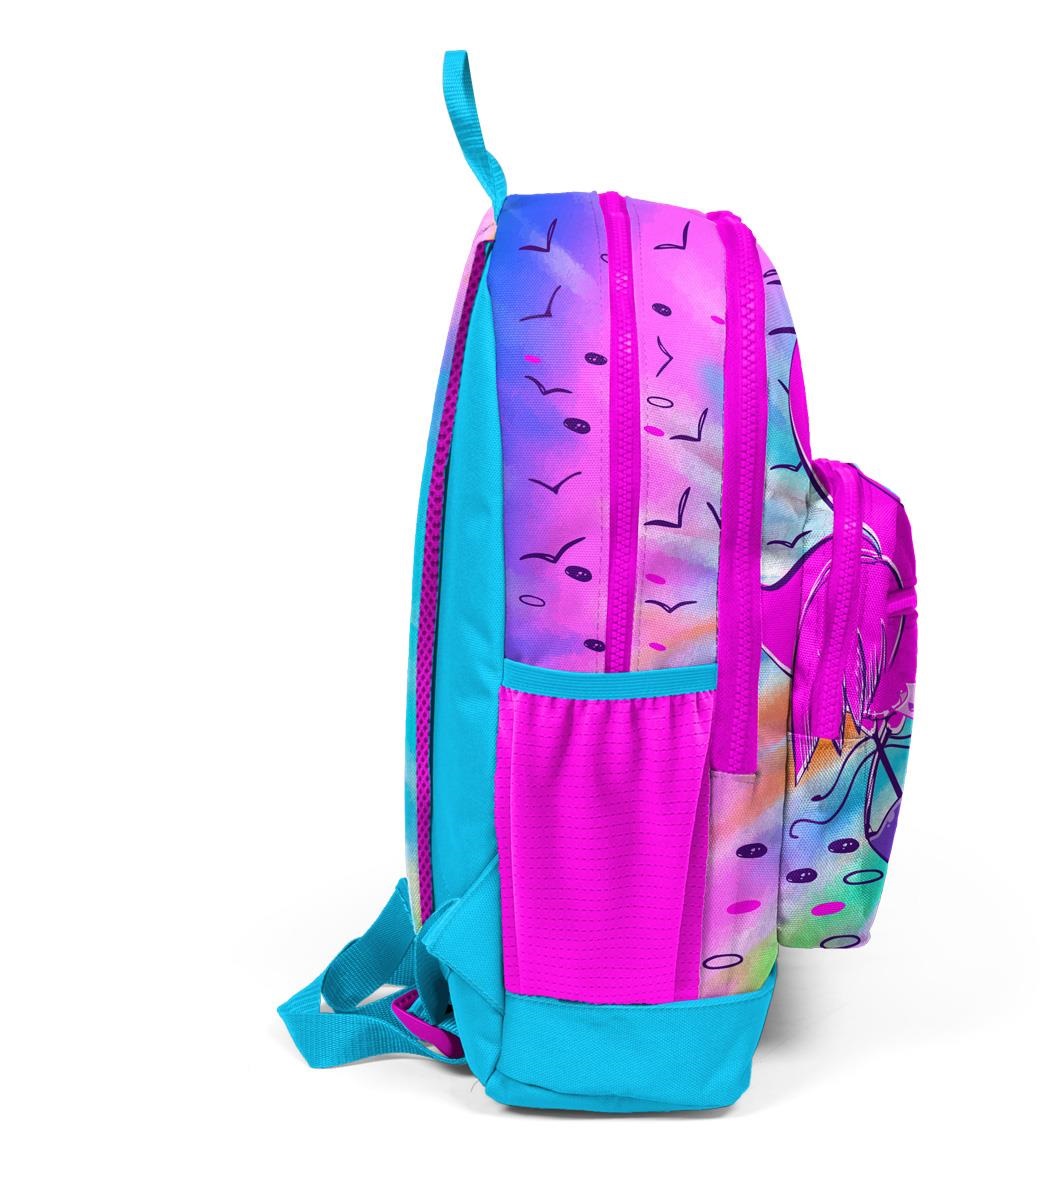 Coral High Kids Four Compartment School Backpack - Blue Pink Flamingo Patterned